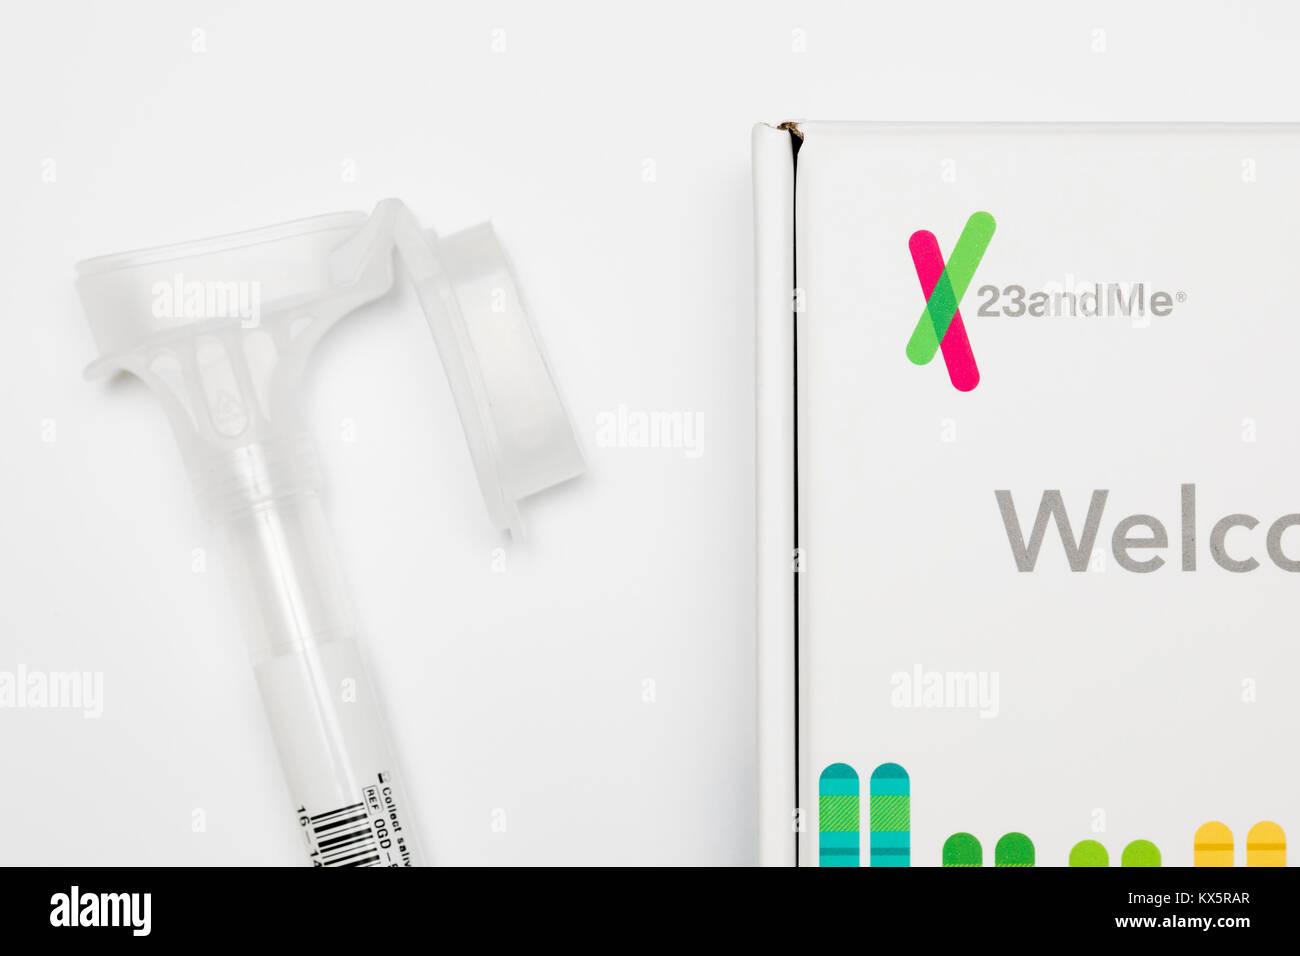 The contents of a 23andMe genetic testing kit as seen on January 3, 2018. Stock Photo